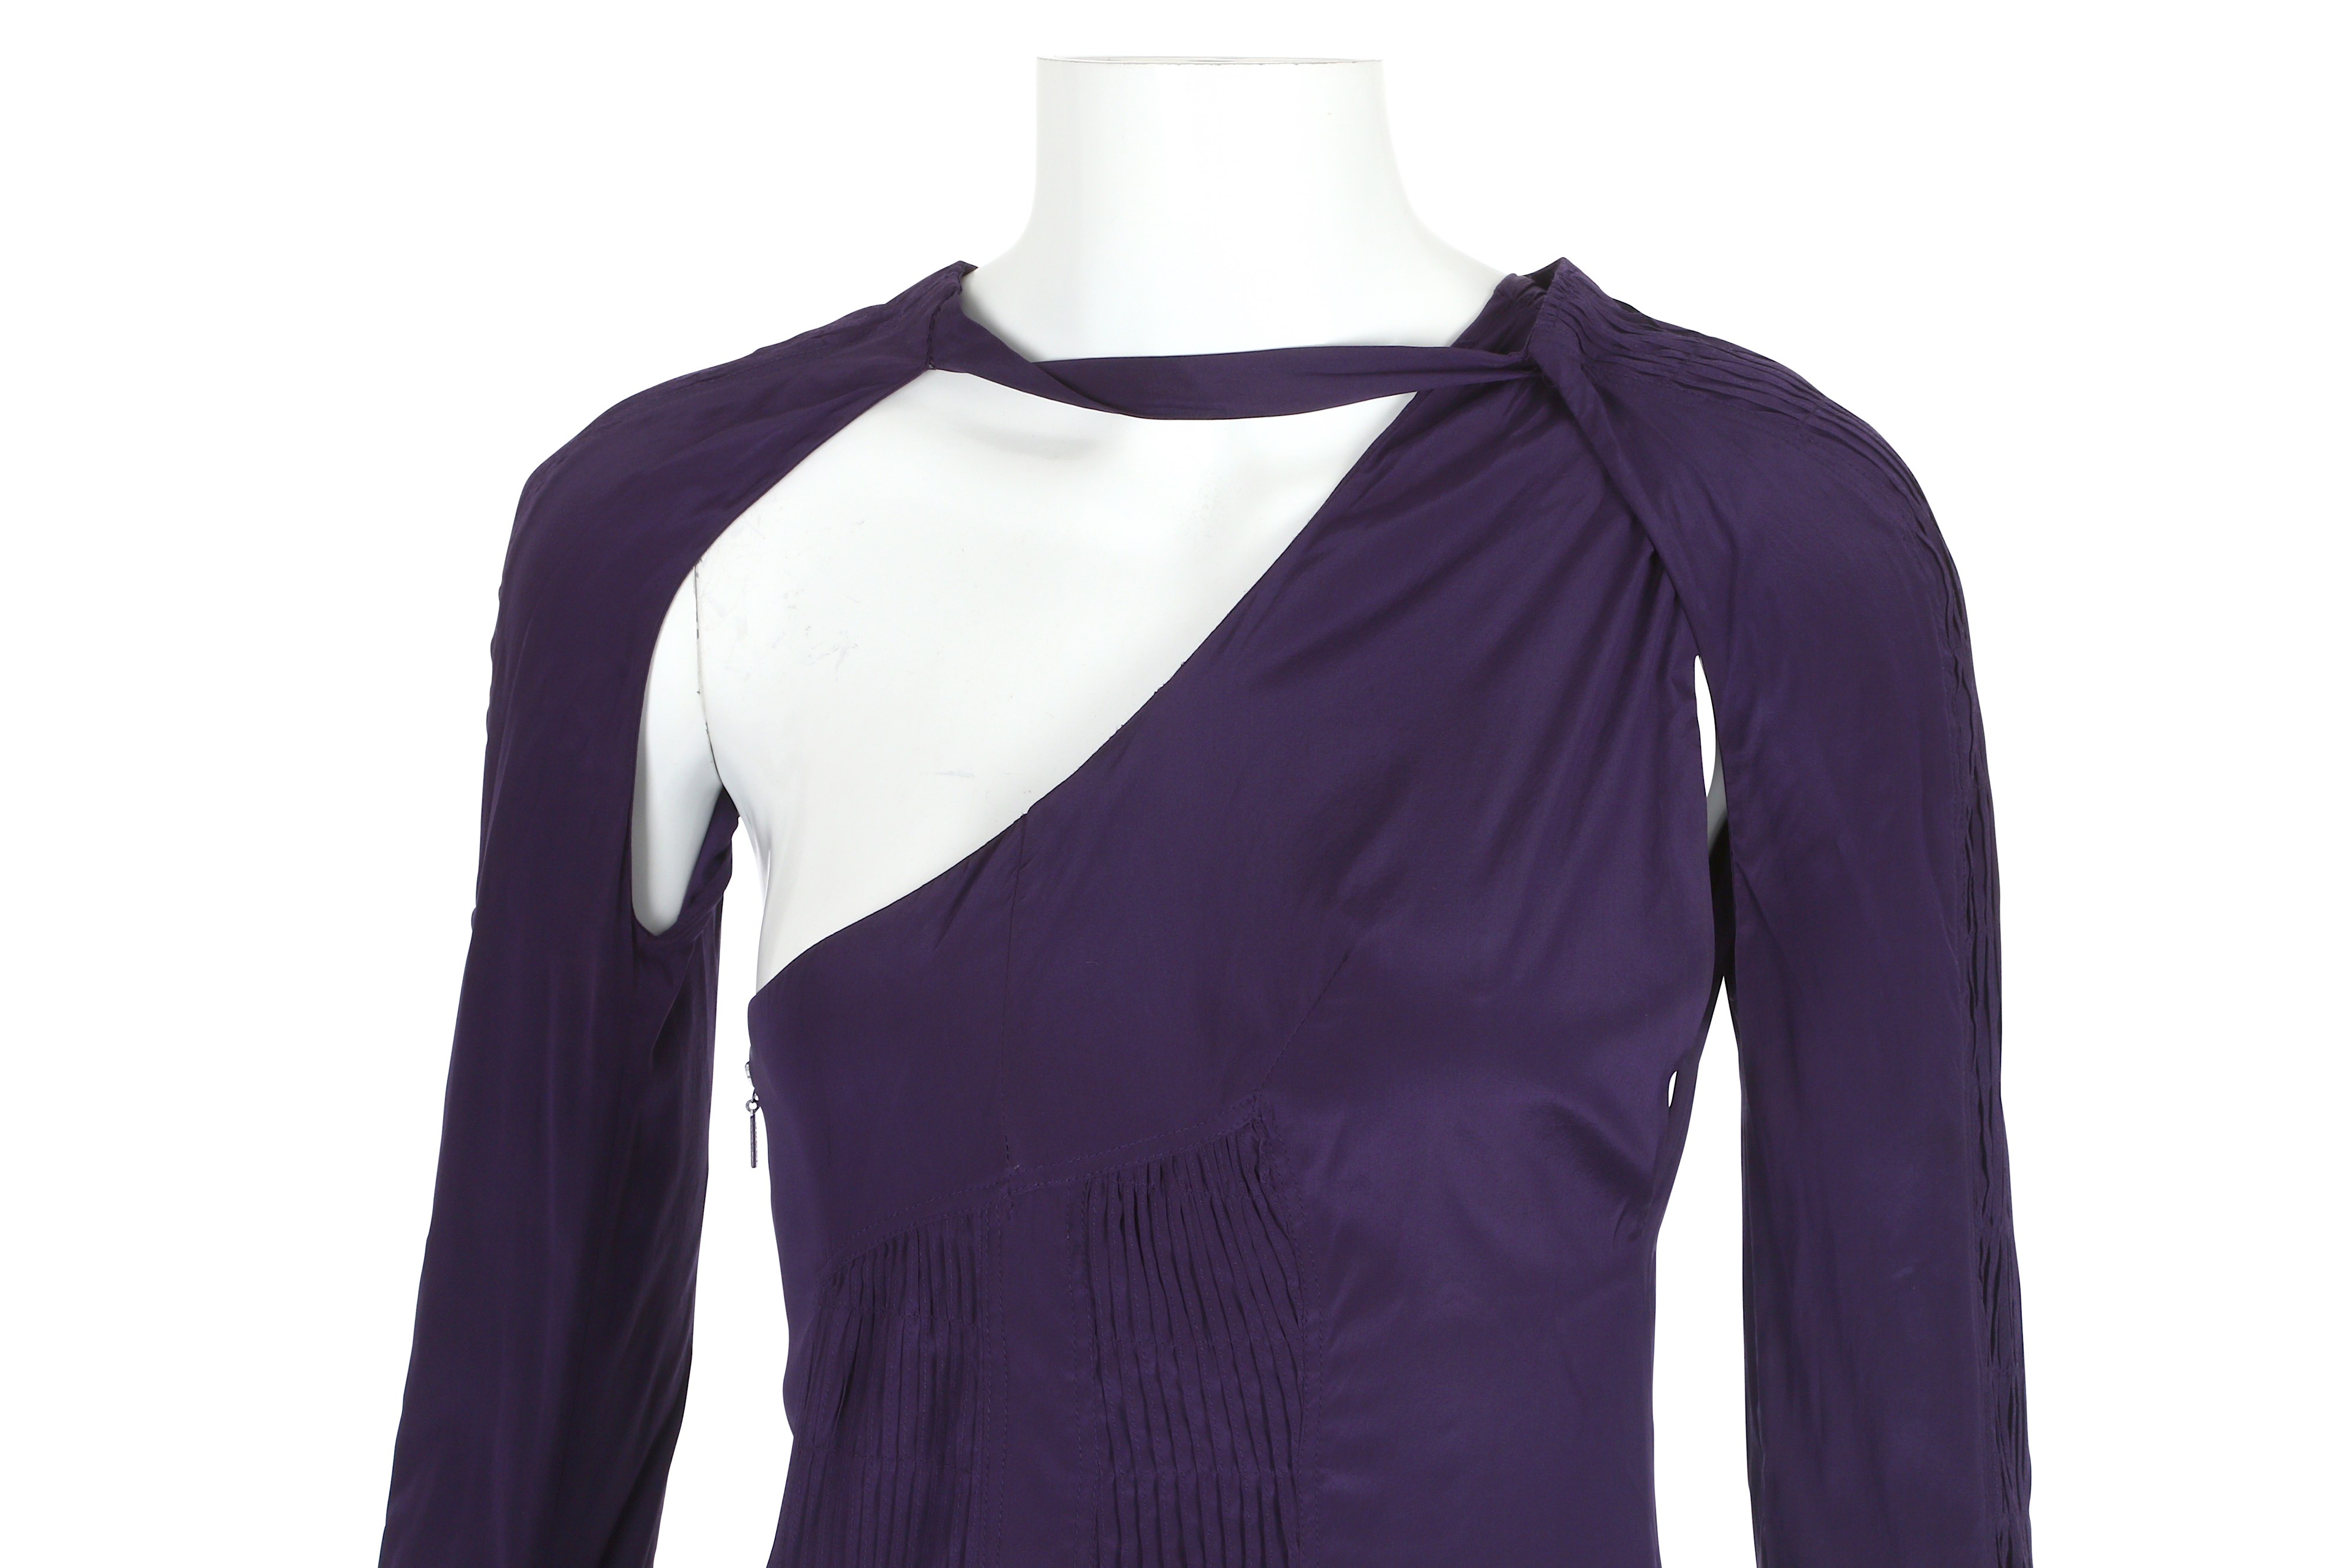 Tom Ford for Gucci Purple Silk Dress - size 40 - Image 3 of 7